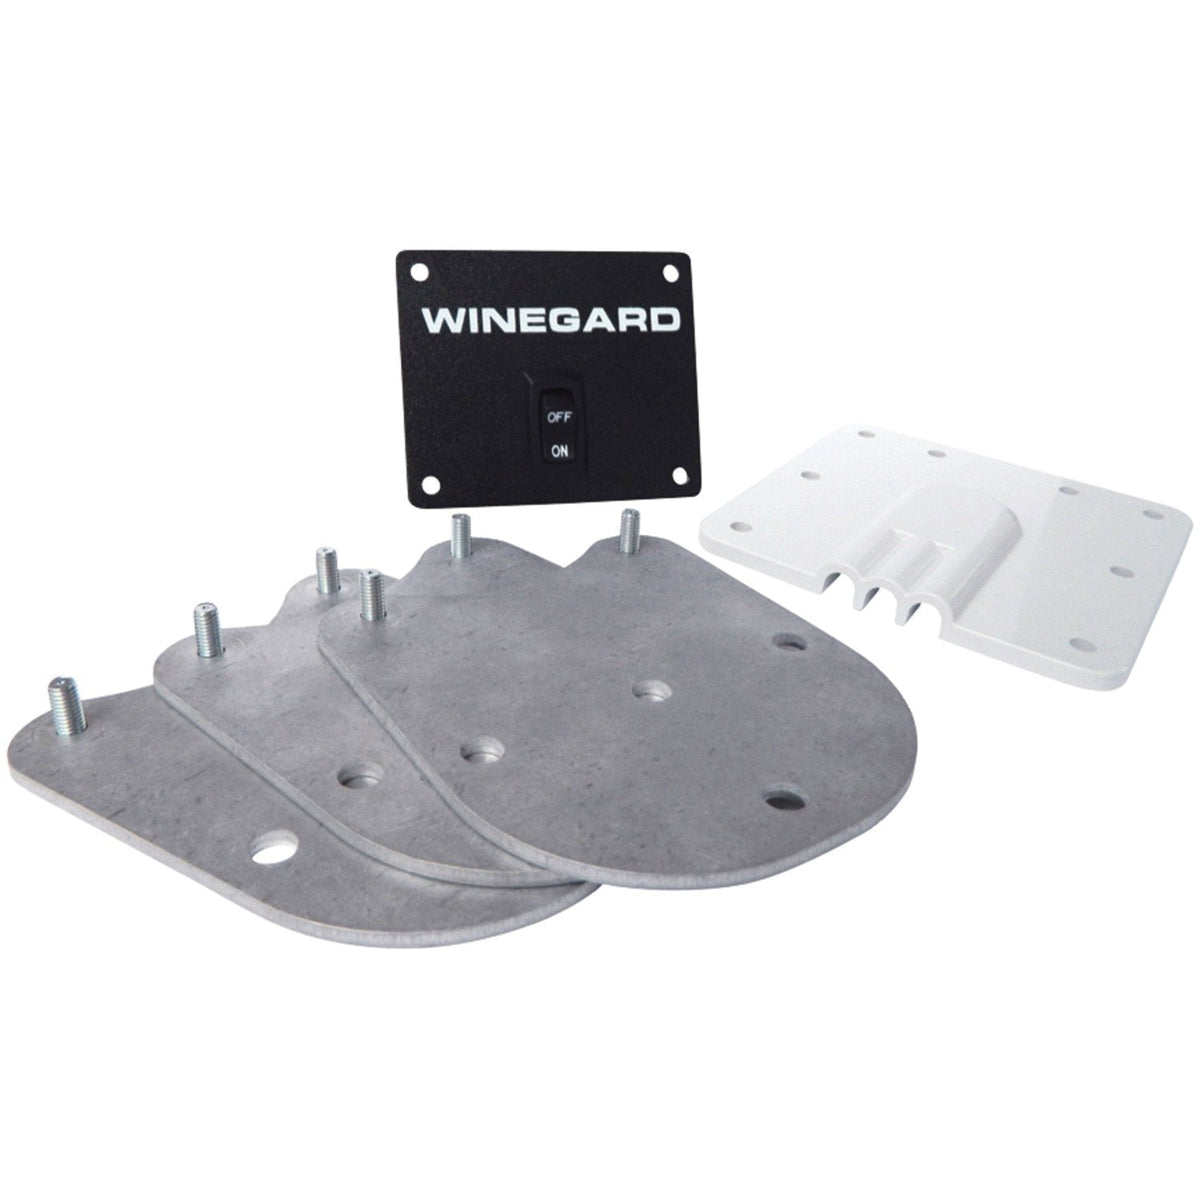 Winegard Qualifies for Free Shipping Winegard Carryout Roof Mount Kit #RK-2000